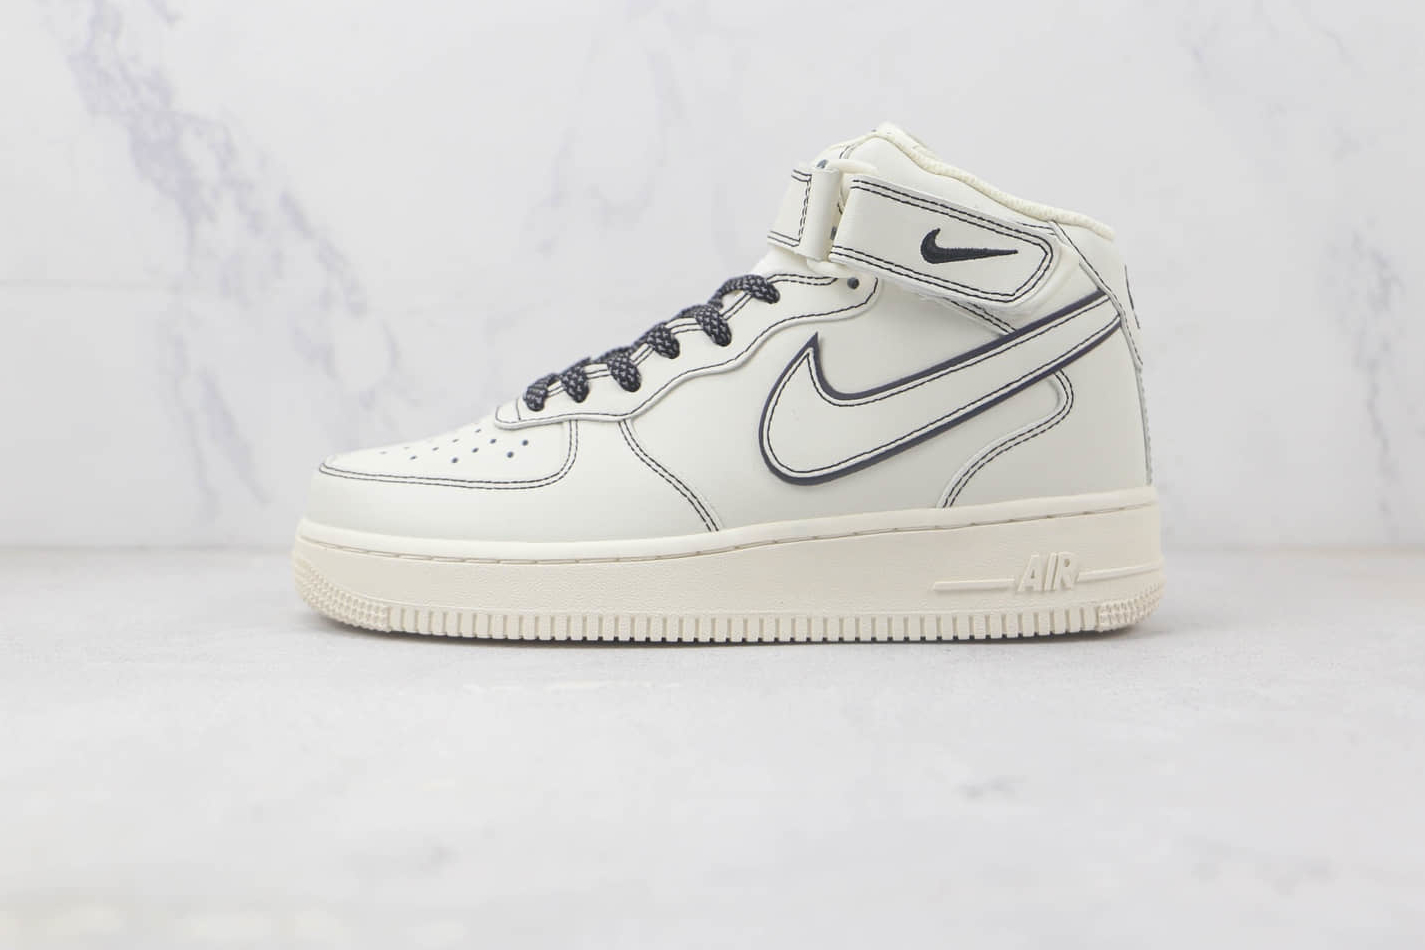 Nike Air Force 1 07 Mid White Black BY6899-693 - Authentic Sneakers and Accessories